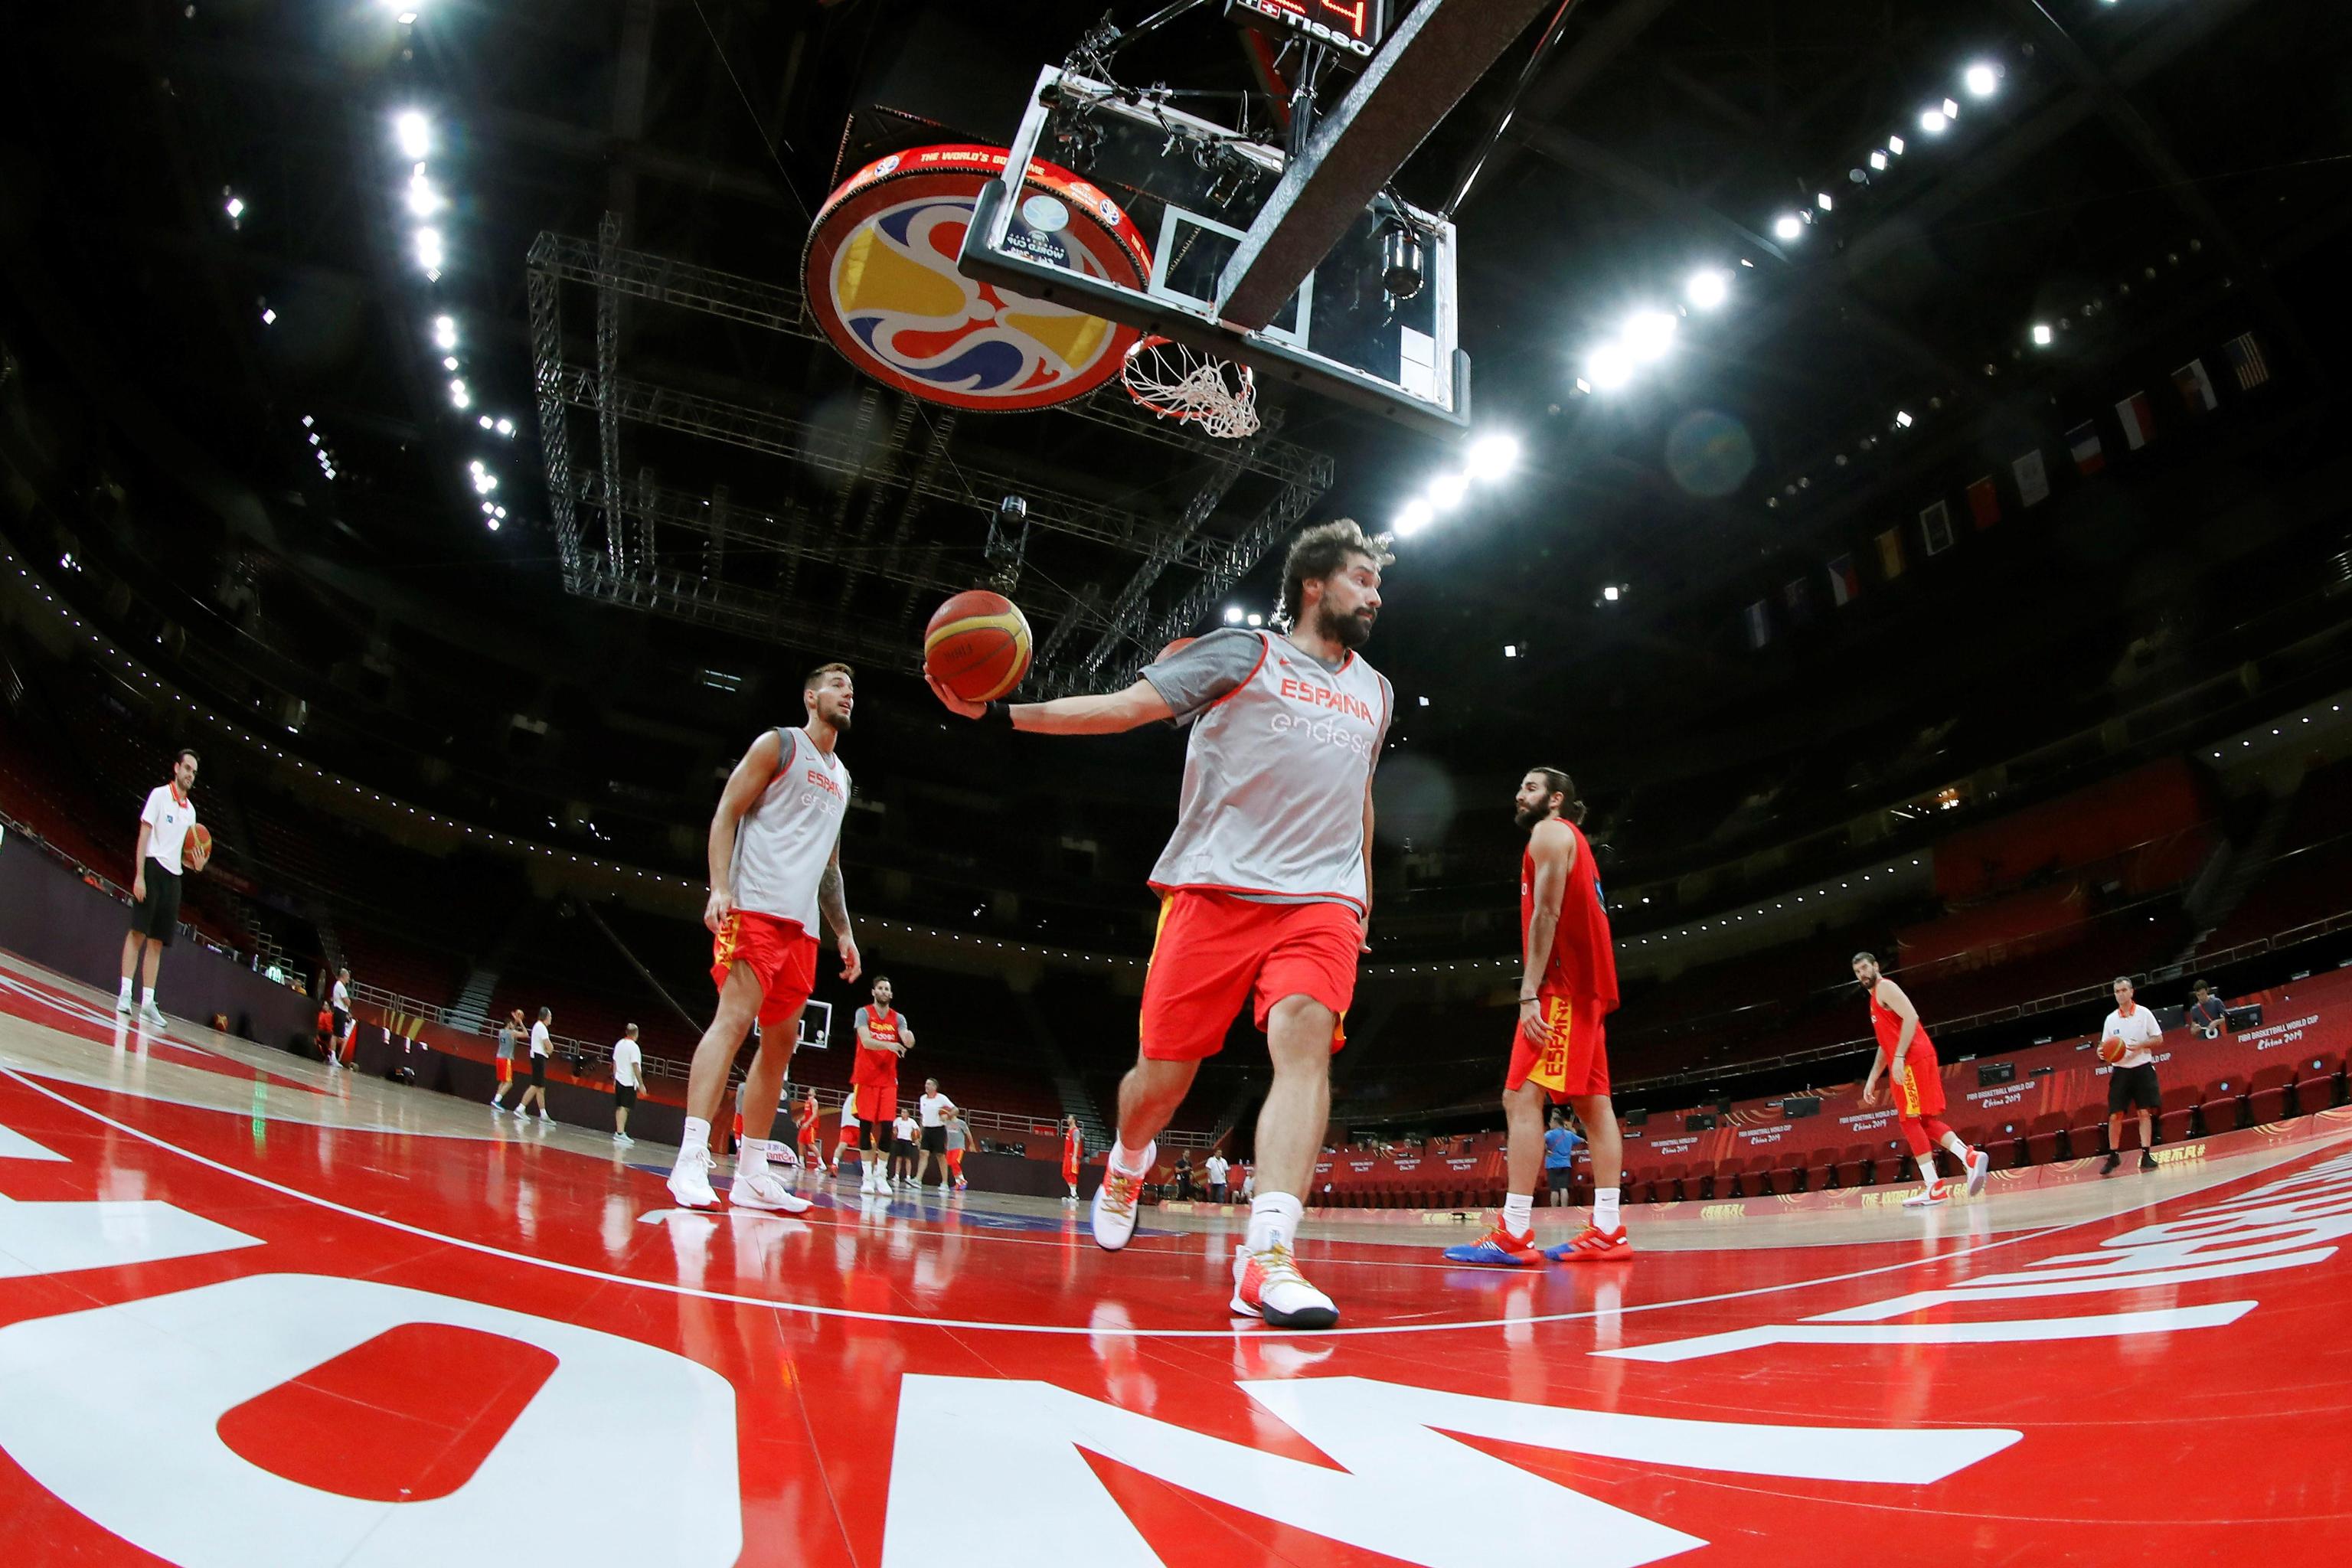 epa07837831 Spain's players attend a training session of the Spanish national basketball team in Beijing, China, 12 September 2019. Spain will face Australia in their FIBA Basketball World Cup 2019 semi final match on 13 September 2019.  EPA/Juan Carlos Hidalgo